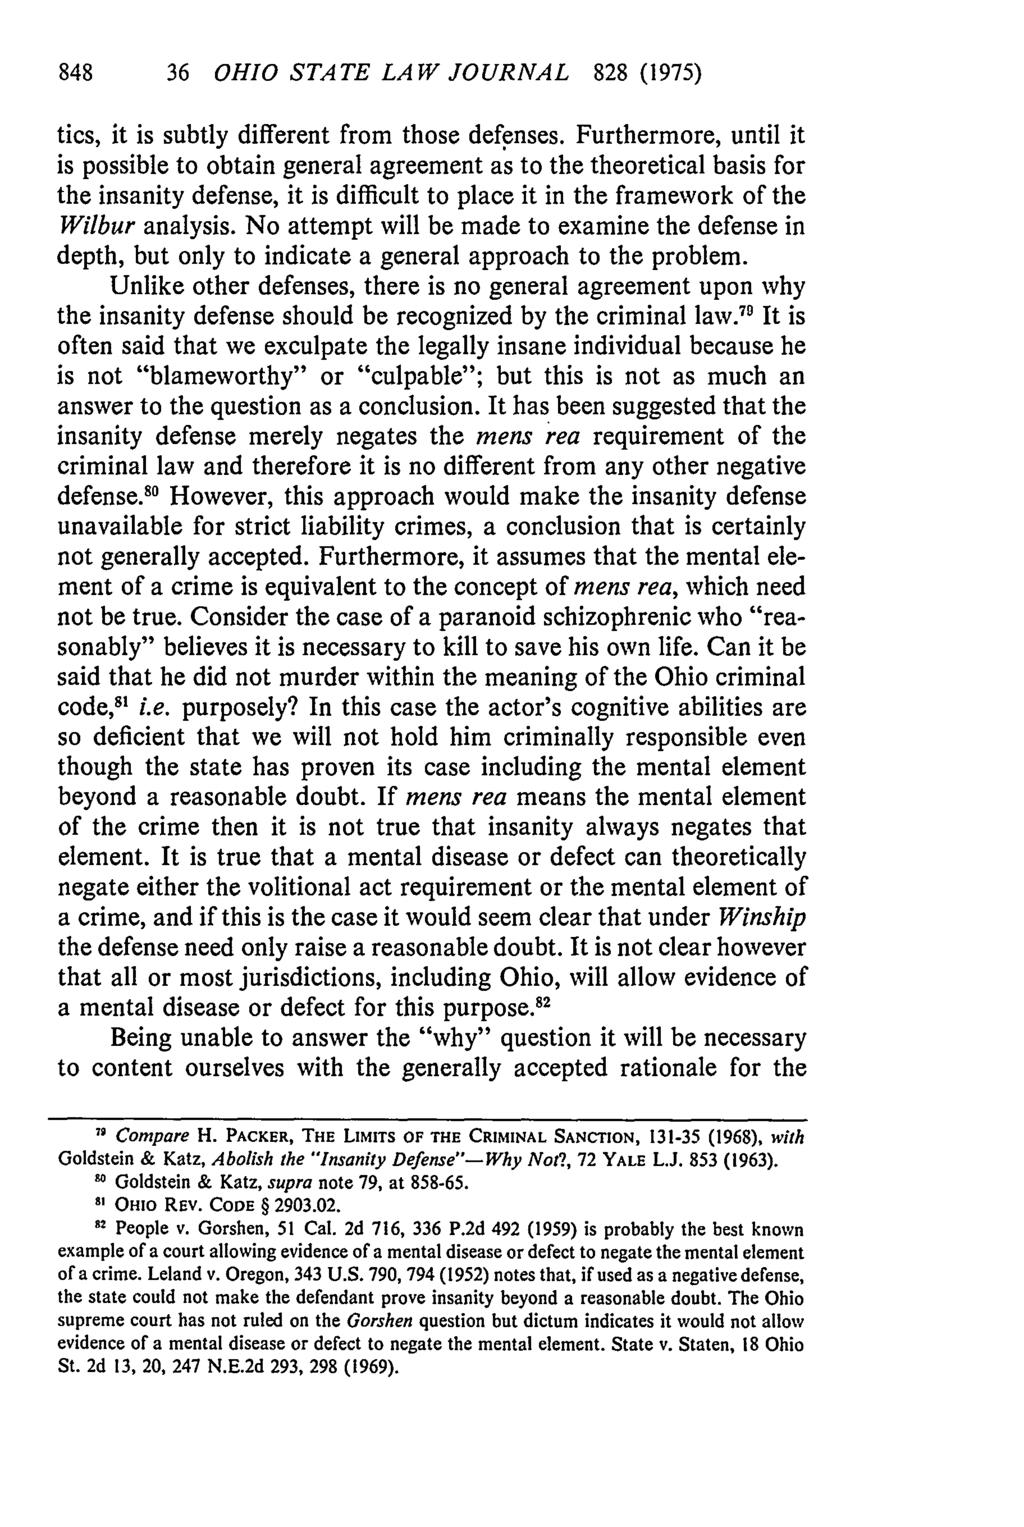 36 OHIO STATE LAW JOURNAL 828 (1975) tics, it is subtly different from those defenses.